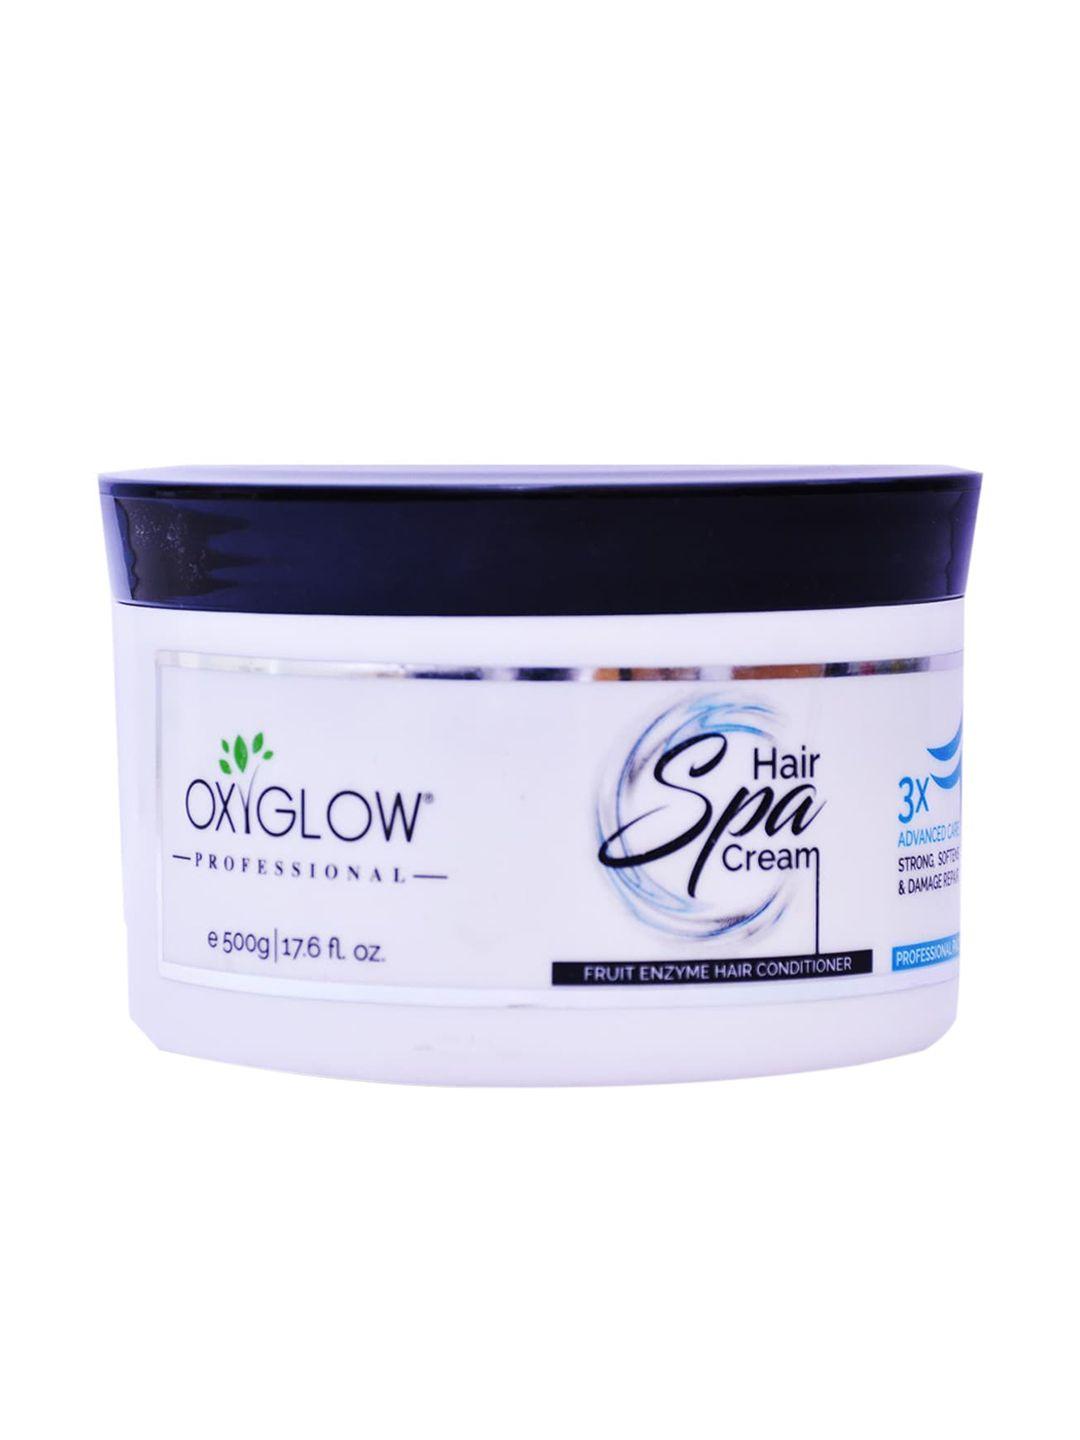 oxyglow hair spa cream with fruit enzymes - 500g